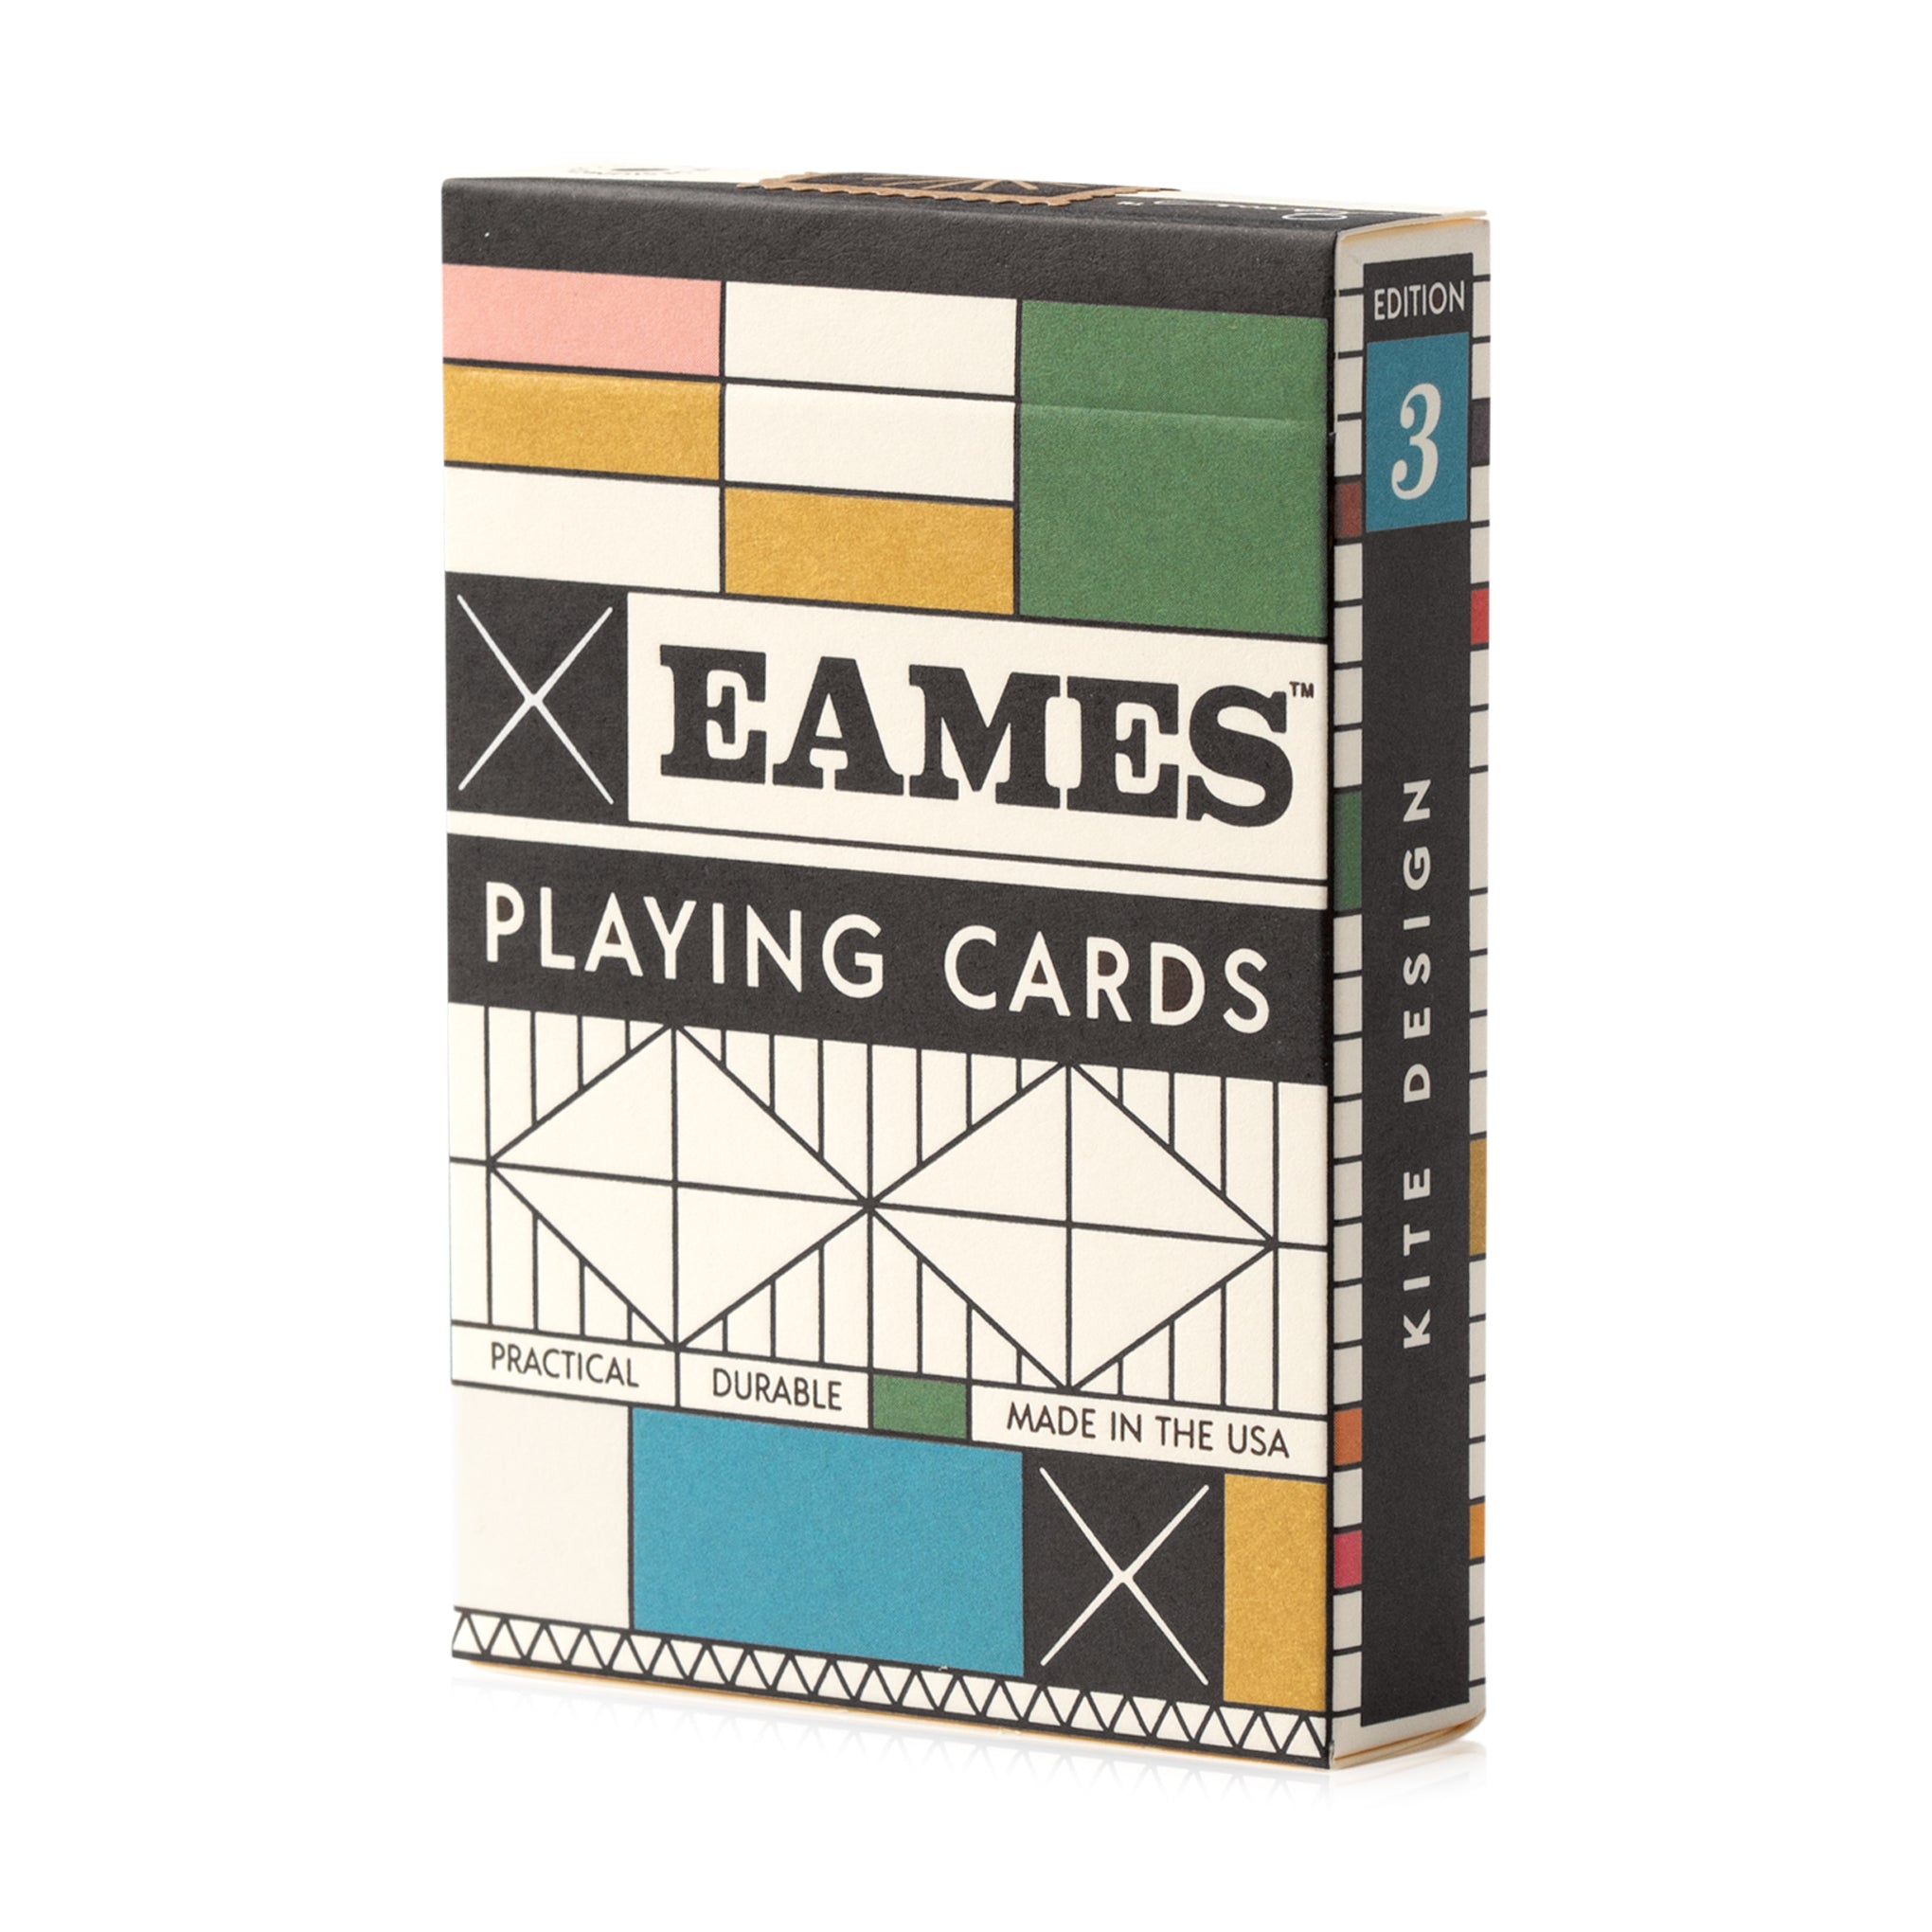 Eames Kite Playing Cards